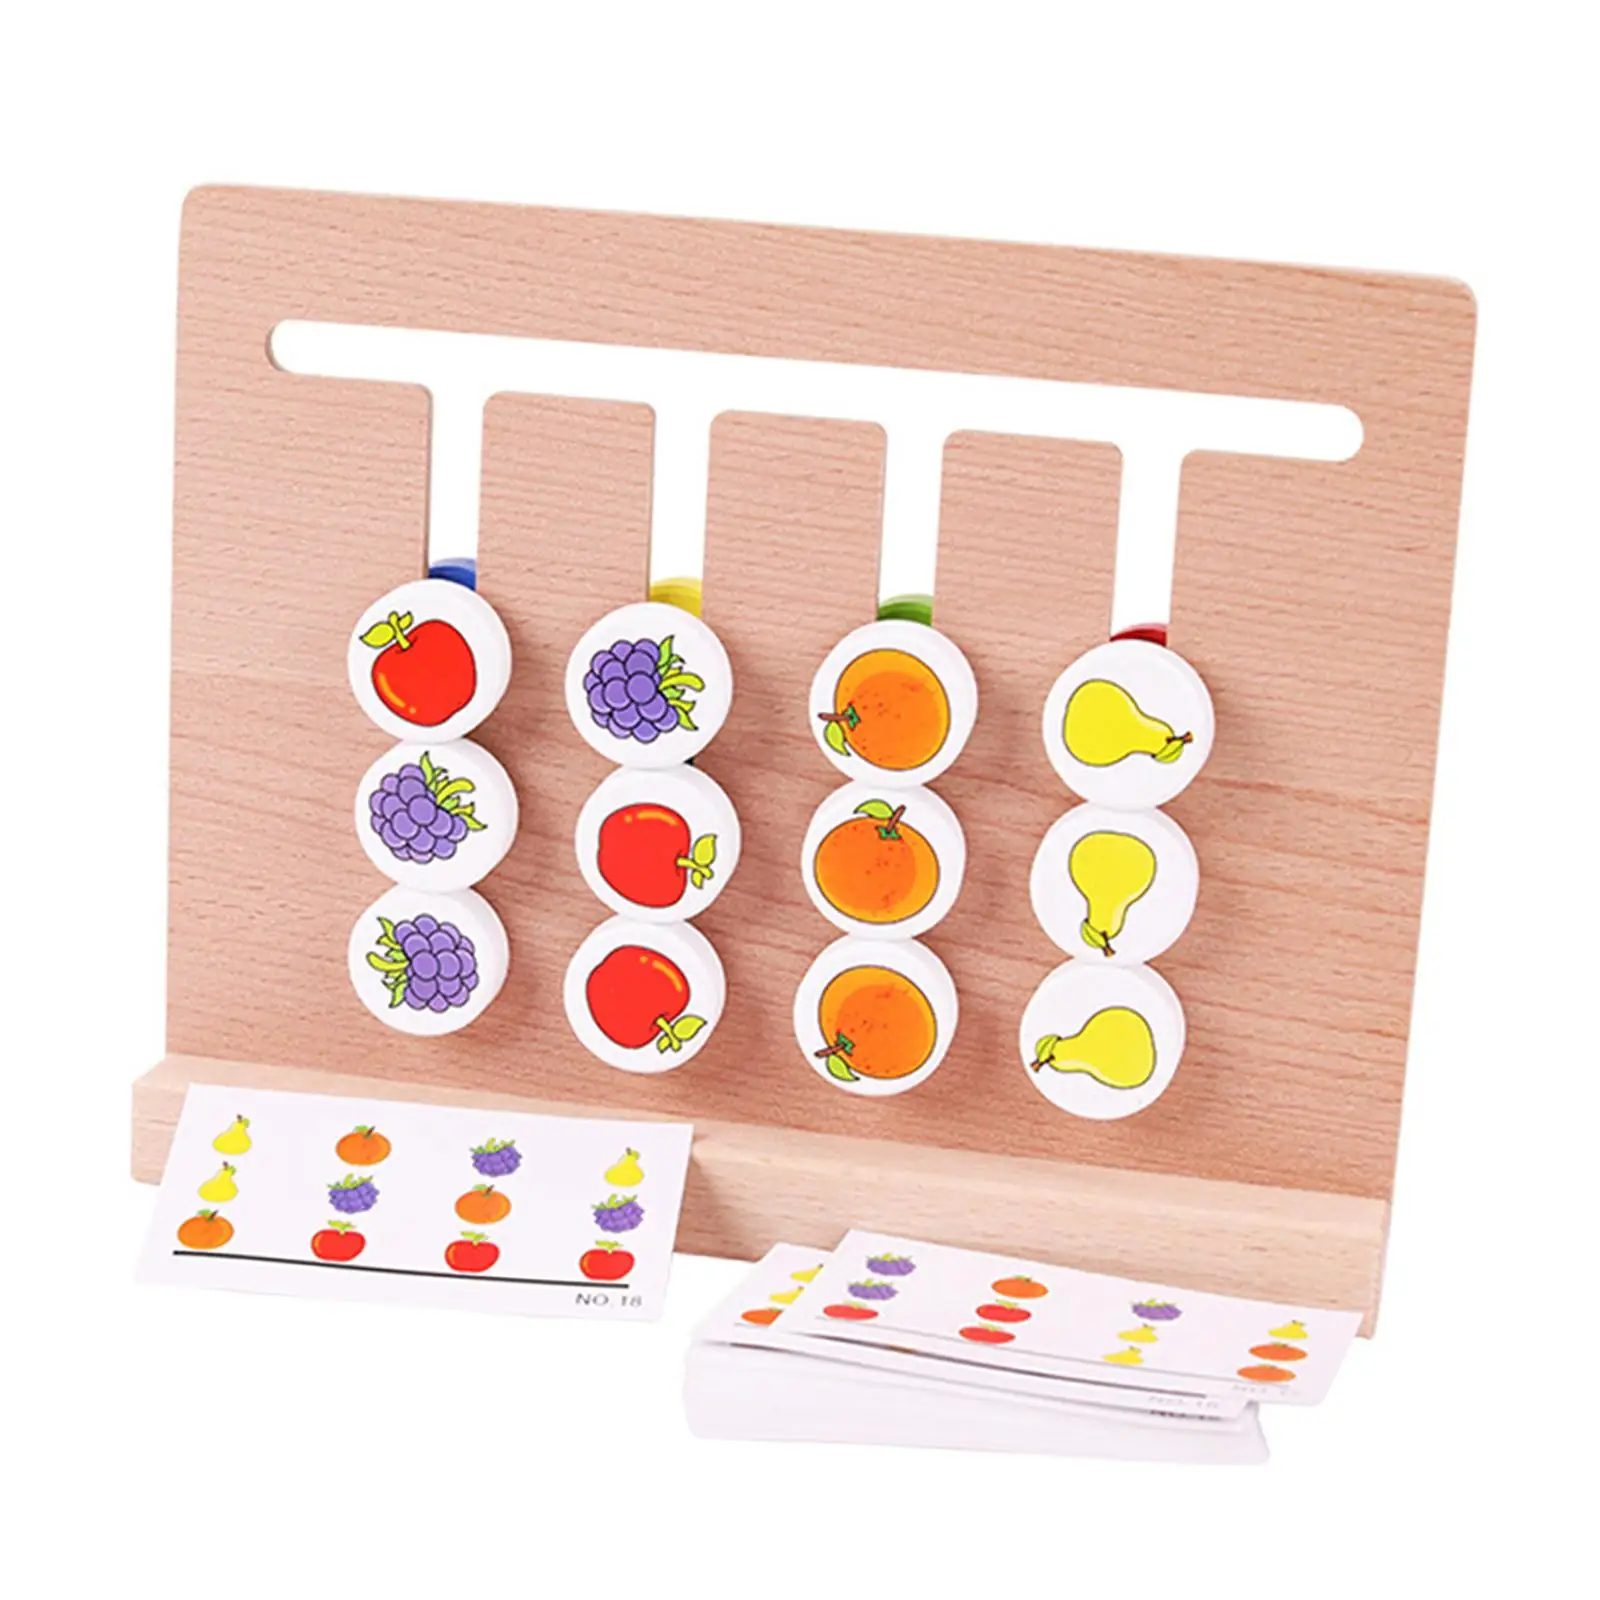 Wooden Matching Game Cognition Birthday Gifts Developmental Toy Educational Color Sort Board for Preschool Nursery Toddlers